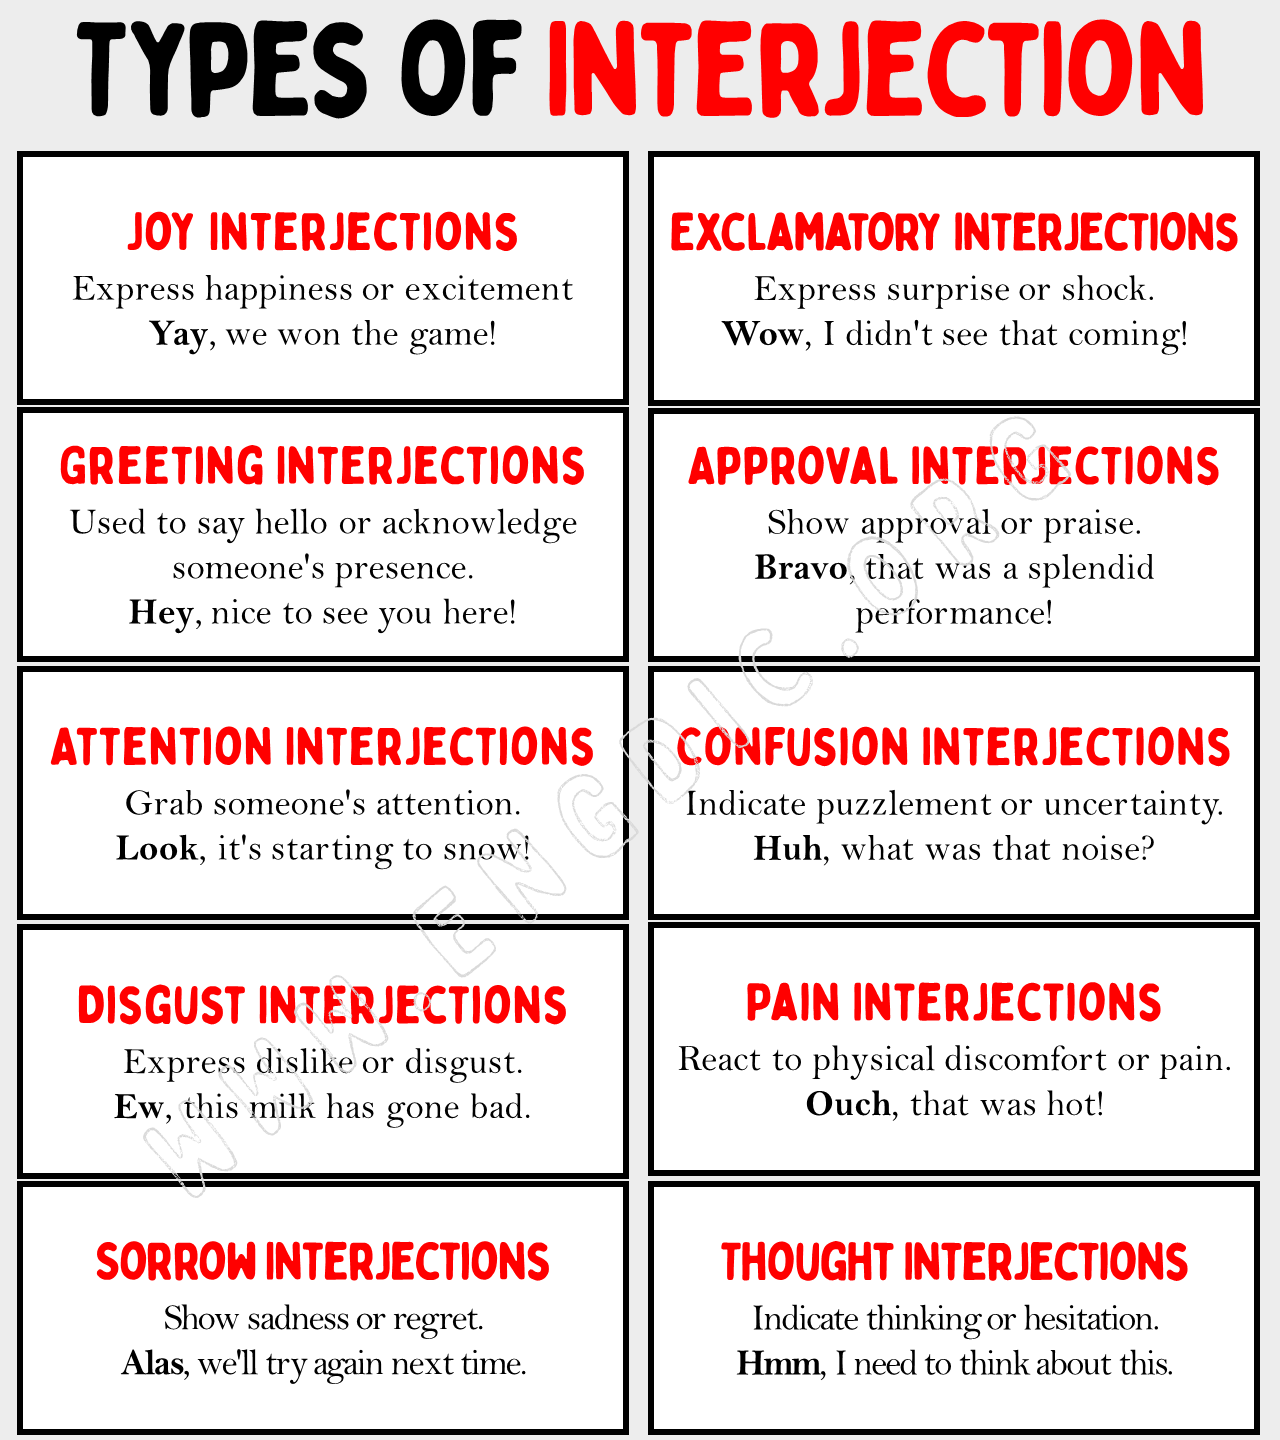 Types of Interjection